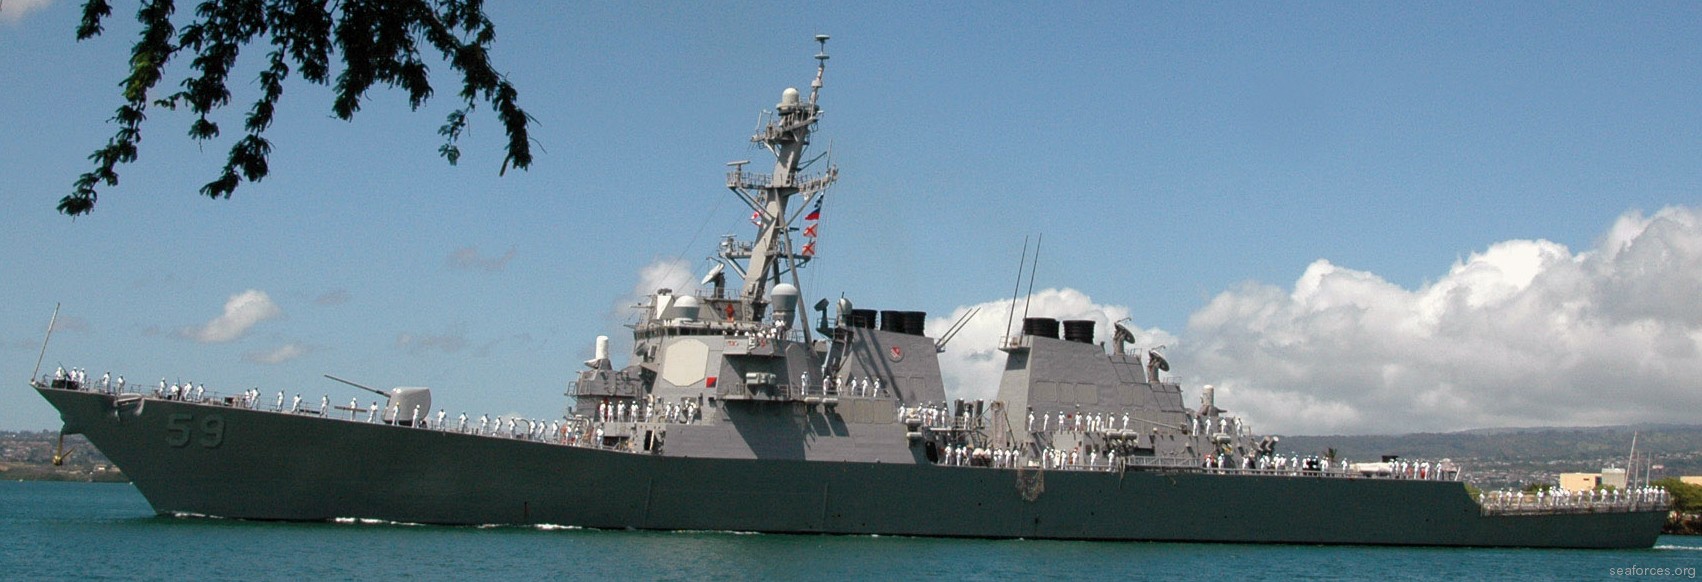 ddg-59 uss russell guided missile destroyer us navy 28